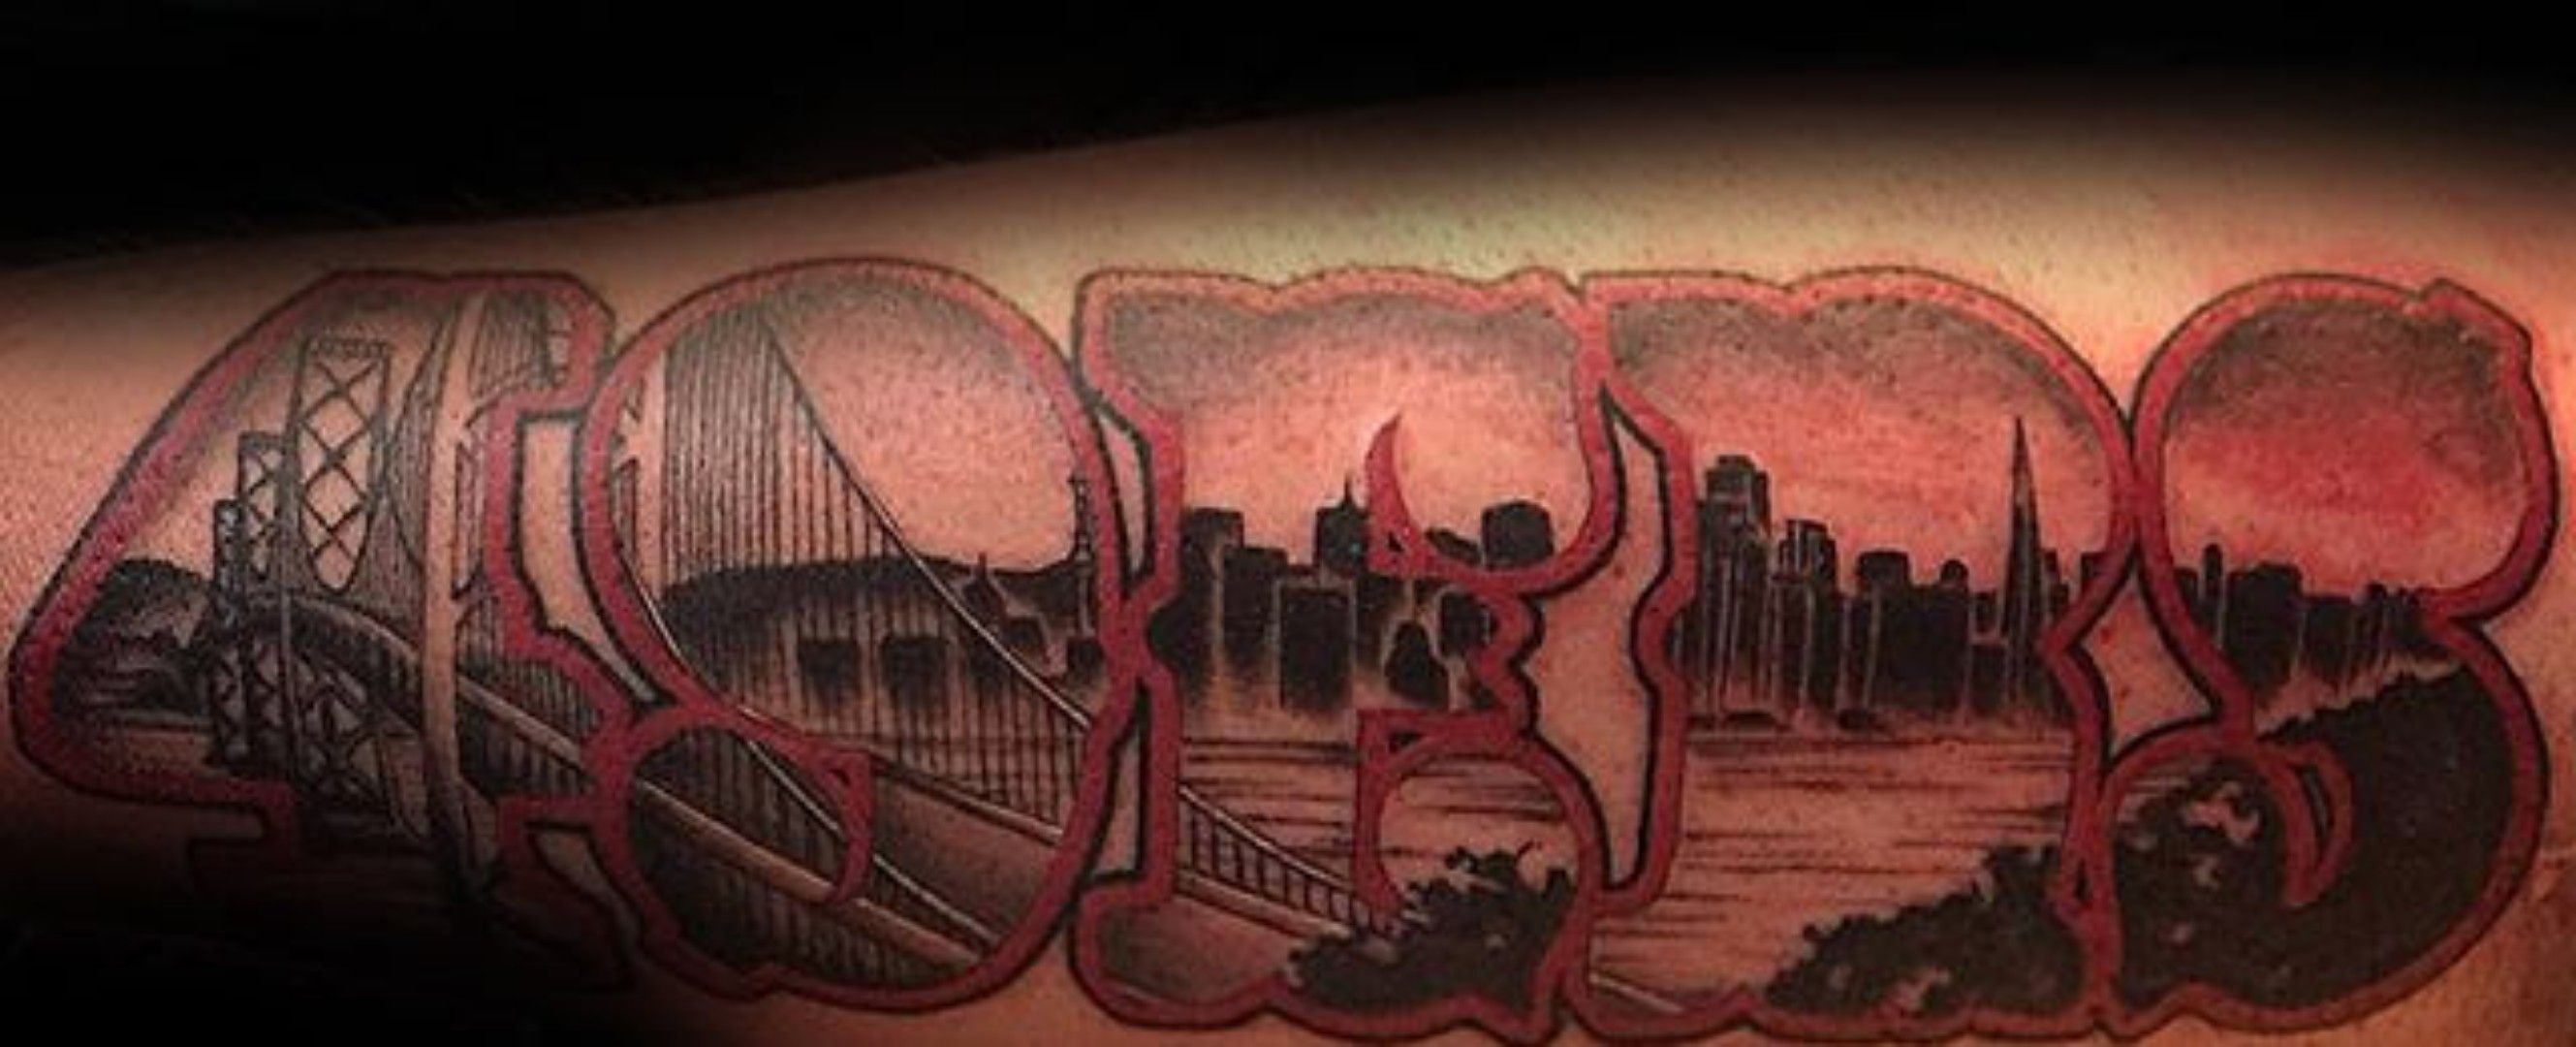 San Francisco 49ers on Twitter Tweet your 49ers tattoos to 49ersInk and  win Watch SpikeTV s InkMaster Season 2 tonight at 109c Contest  details httptcopufiNd4Q  Twitter